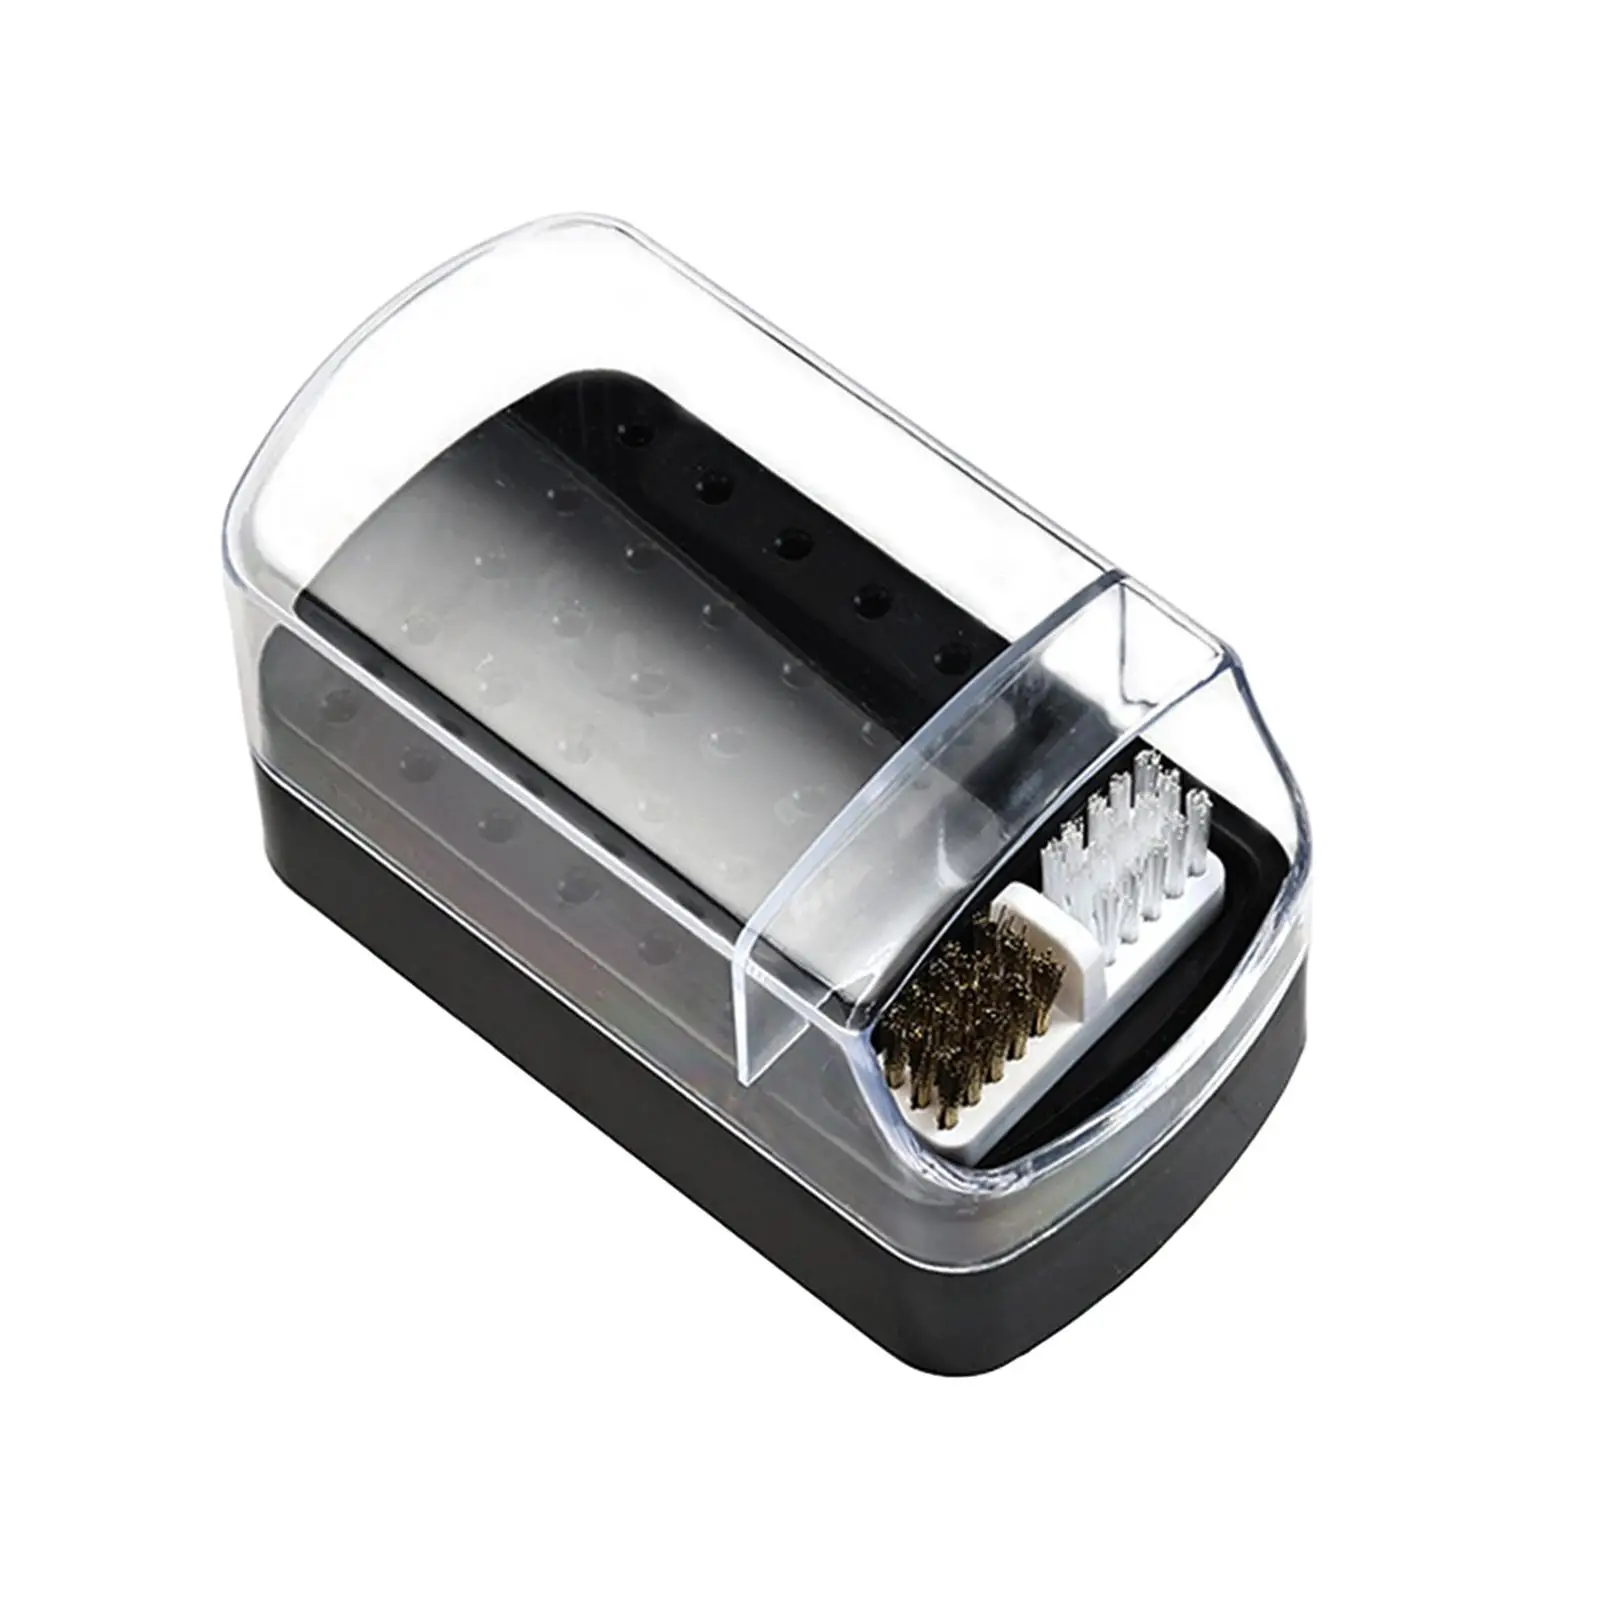 Nail Drill Bit Holder 30 Slots Container Lightweight Salon with Cleaning Brass Wire and Soft Brushes Polishing Bits Storage Box